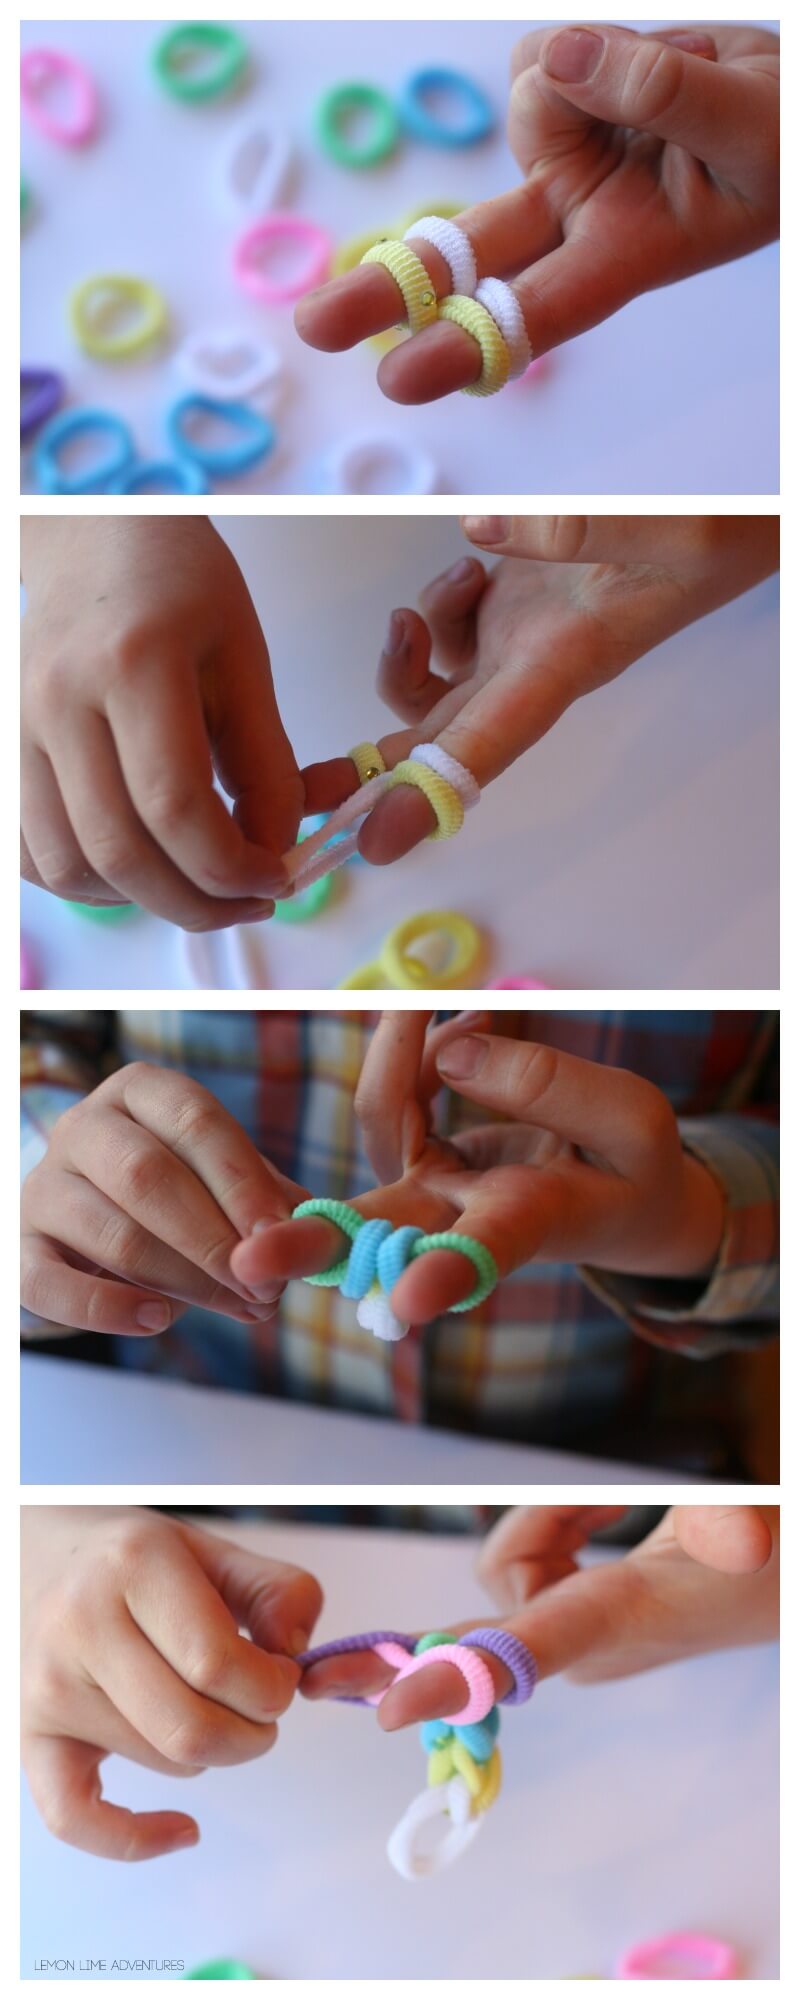 How to make a simple finger knit project without rainbow looms